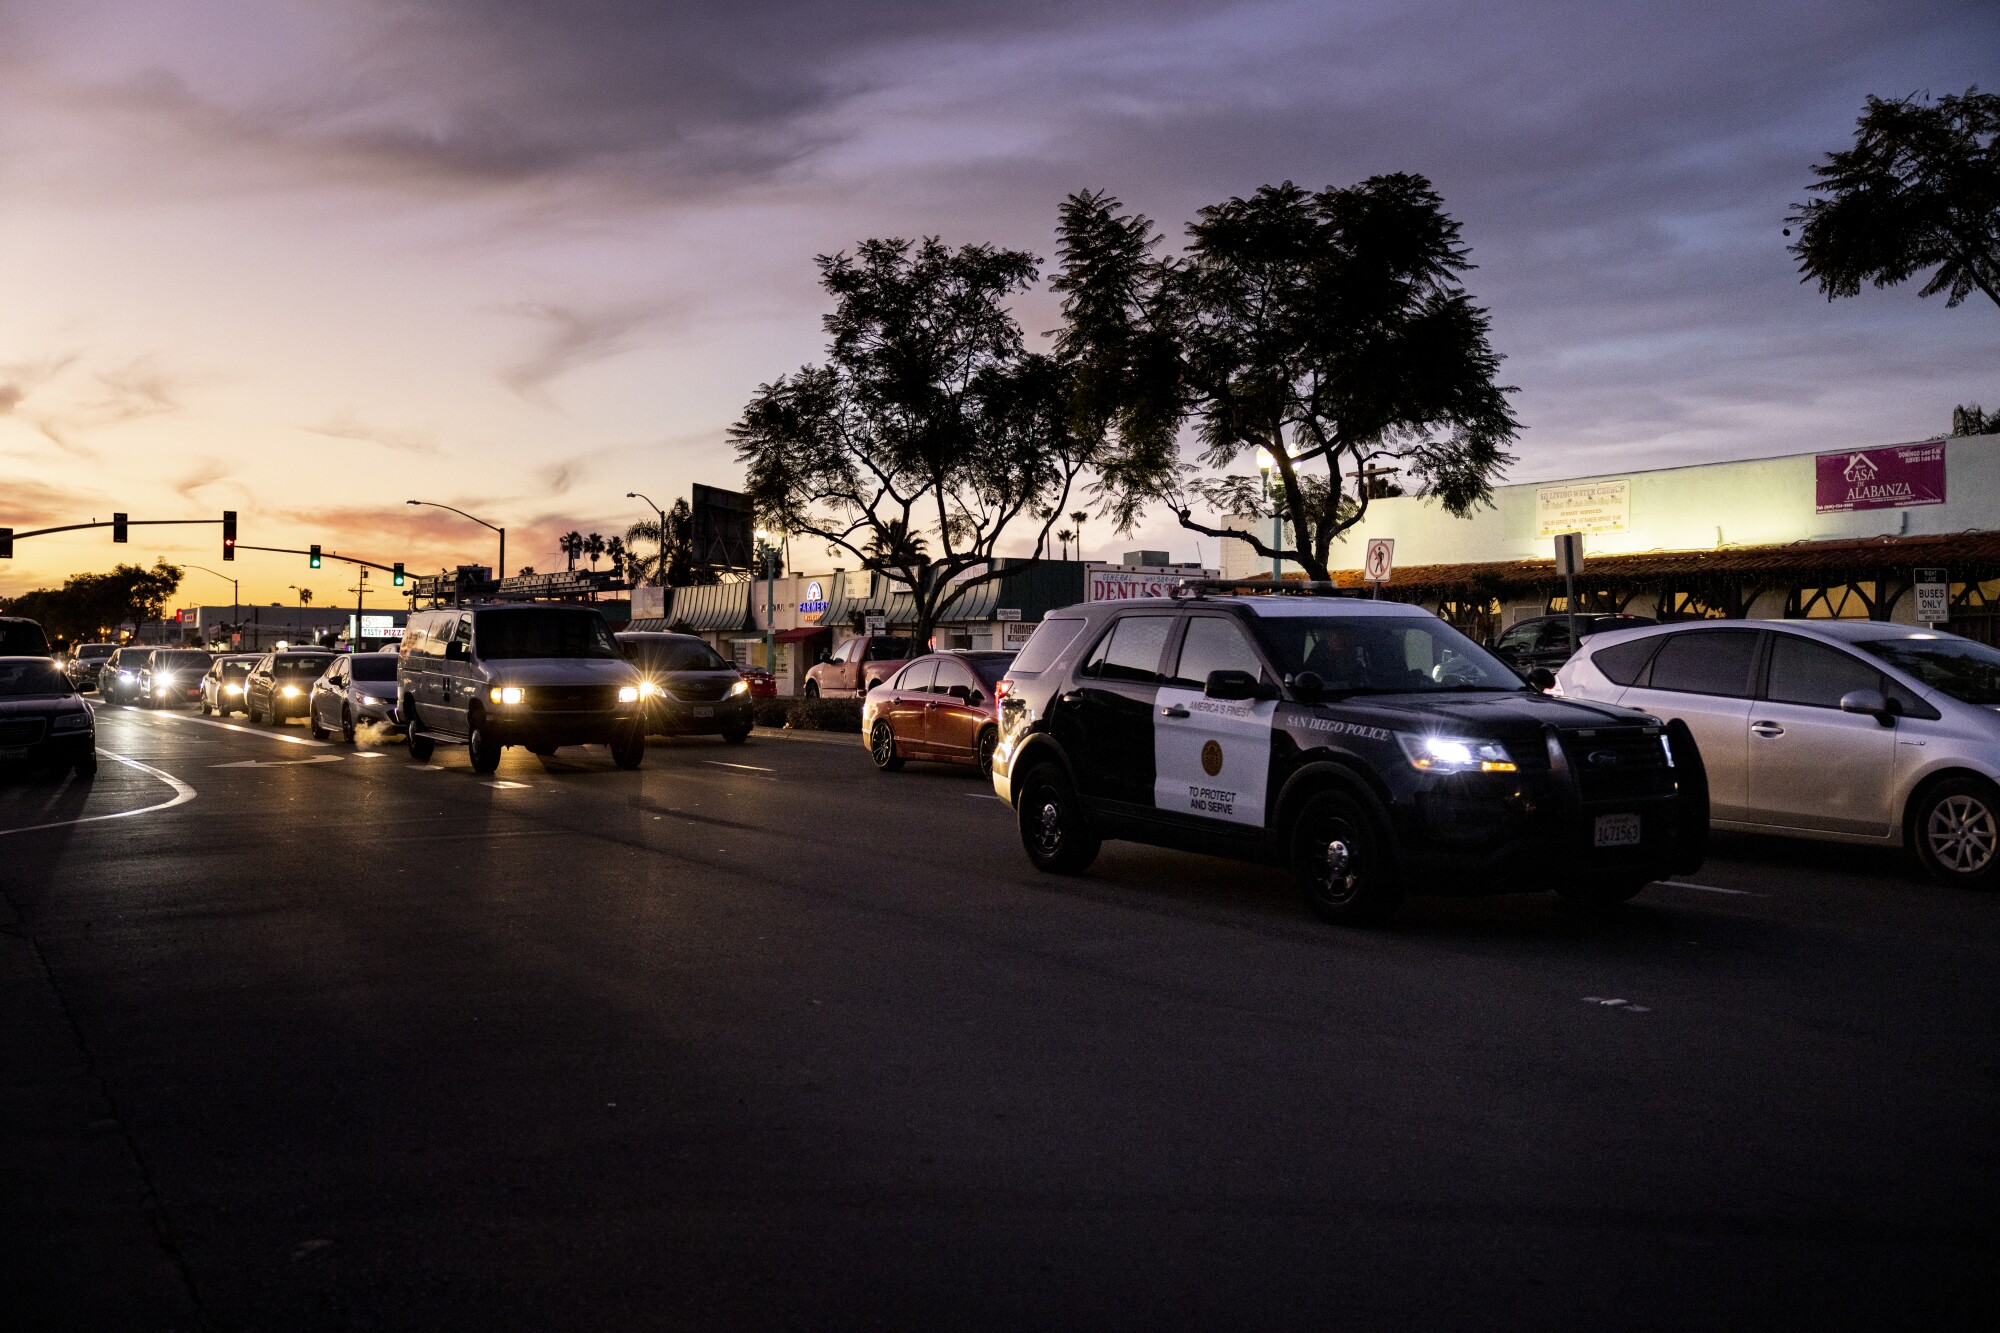 A San Diego police vehicle patrols along El Cajon Boulevard at sunset in the Teralta West neighborhood  Wednesday.